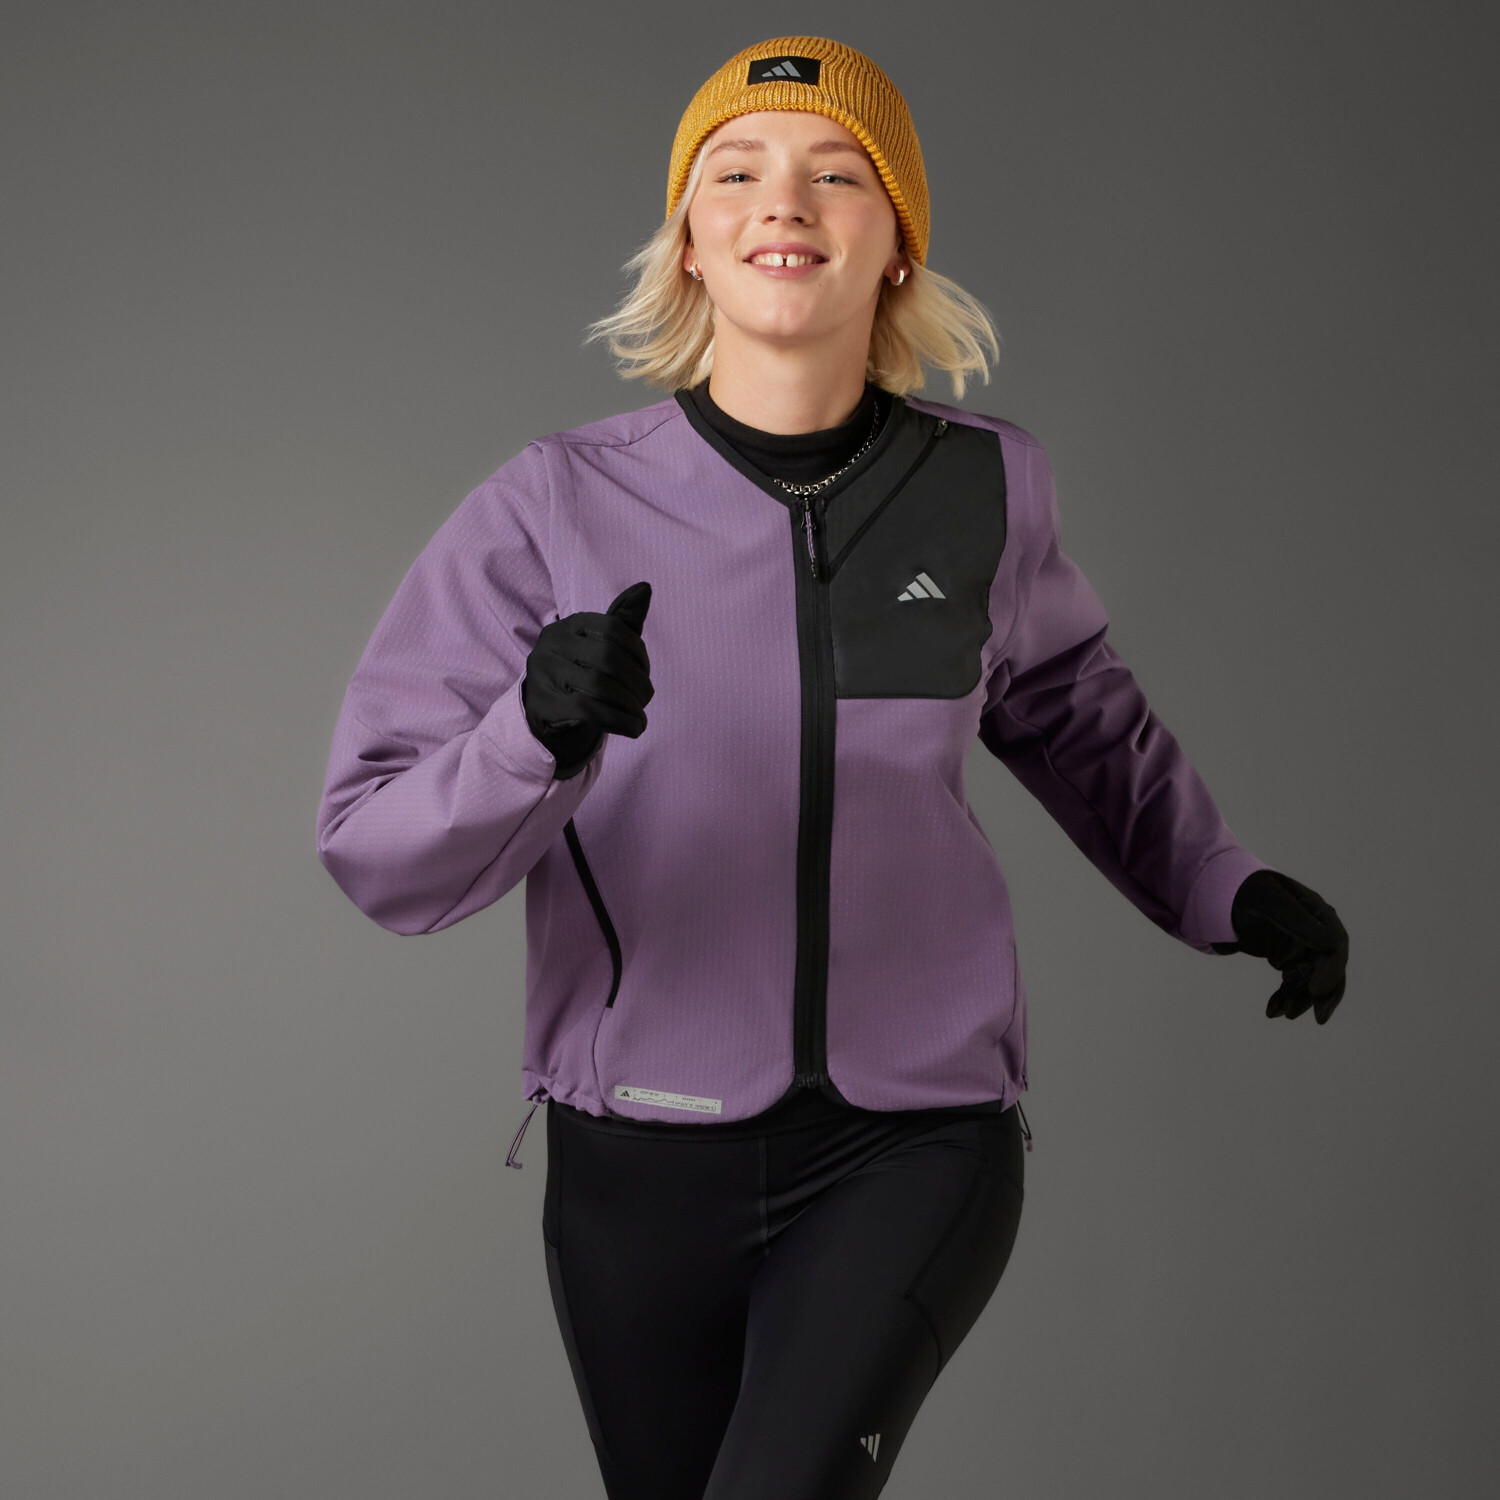 Adidas Ultimate Running Conquer the Elements € COLD.RDY 69,99 ab shadow violet Preisvergleich | (IM1916) Jacket Running bei